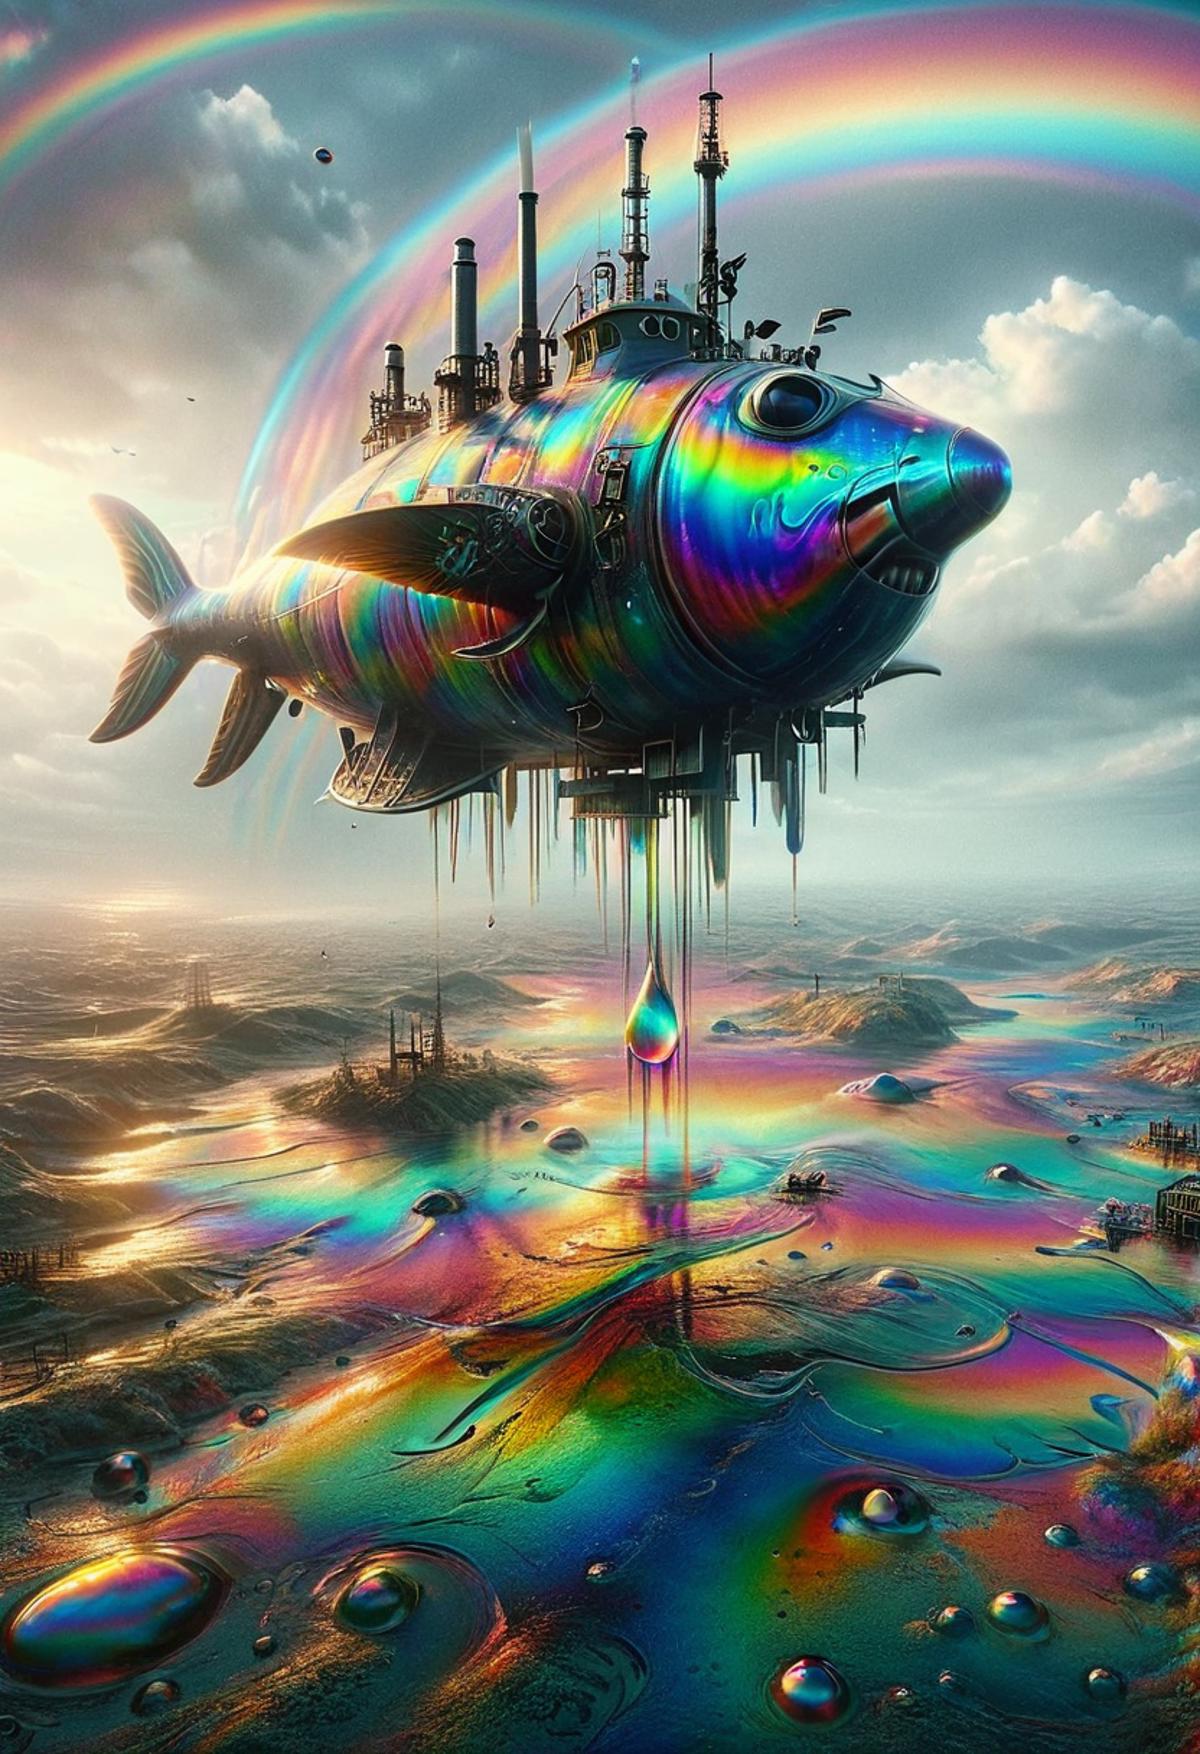 Colorful Fish-Shaped Airplane with Rainbow Tail and Streaming Tears Flying Over a Rainbow Landscape